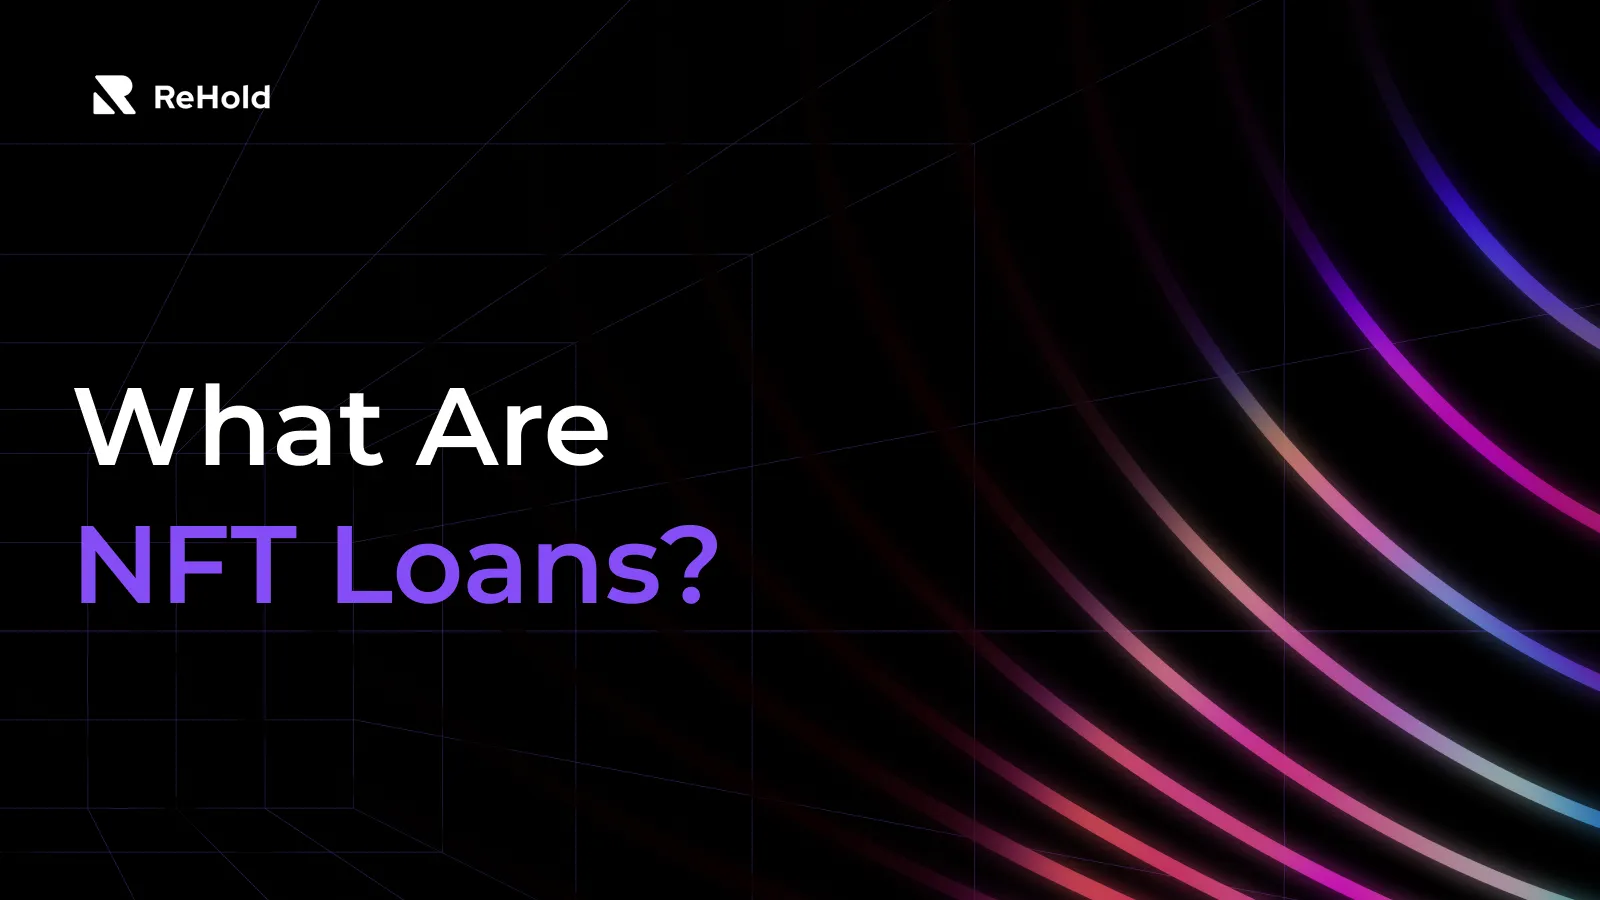 What Are NFT Loans And How Do They Work?